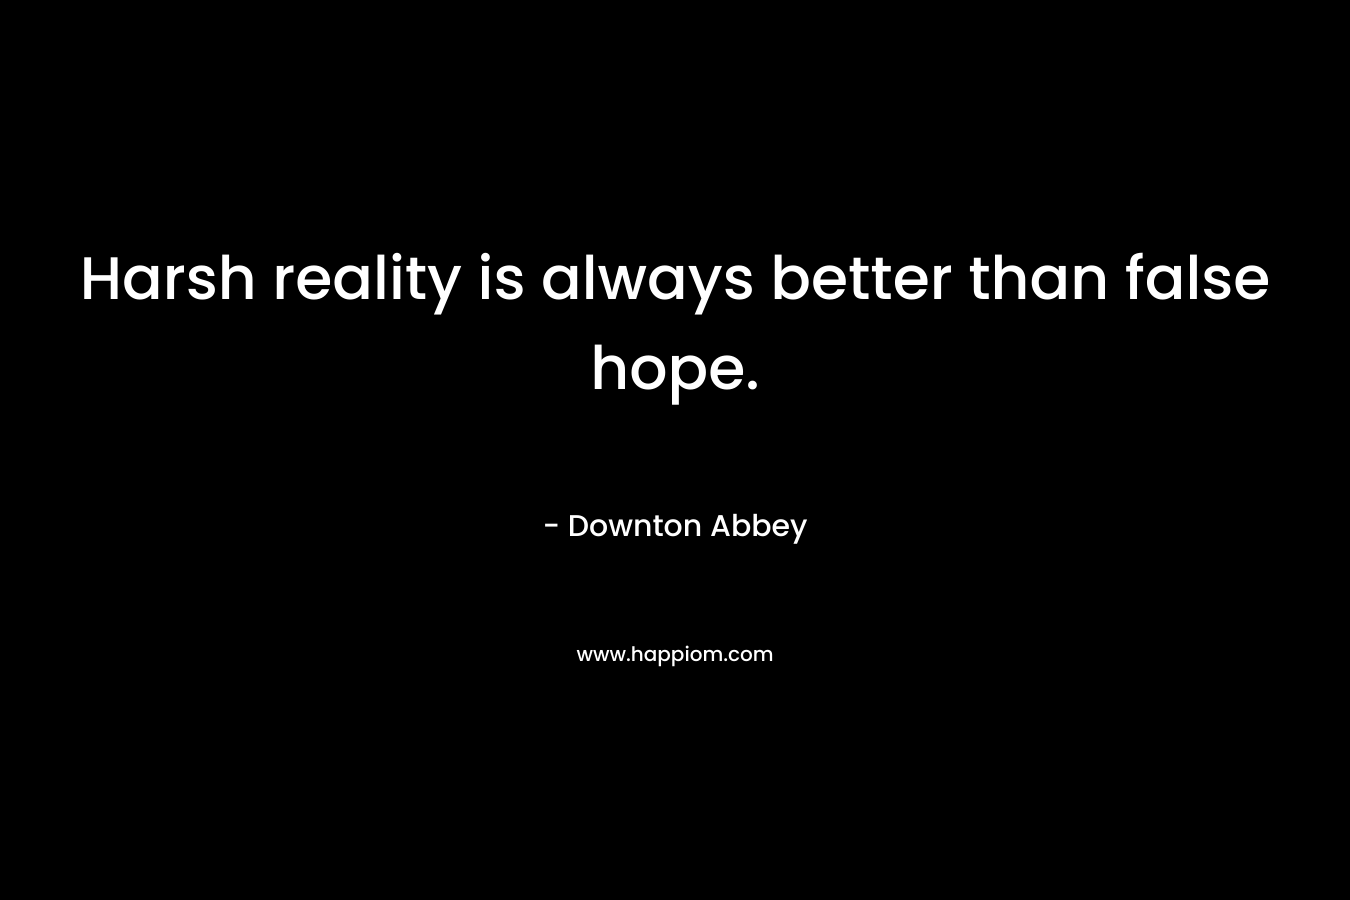 Harsh reality is always better than false hope. – Downton Abbey